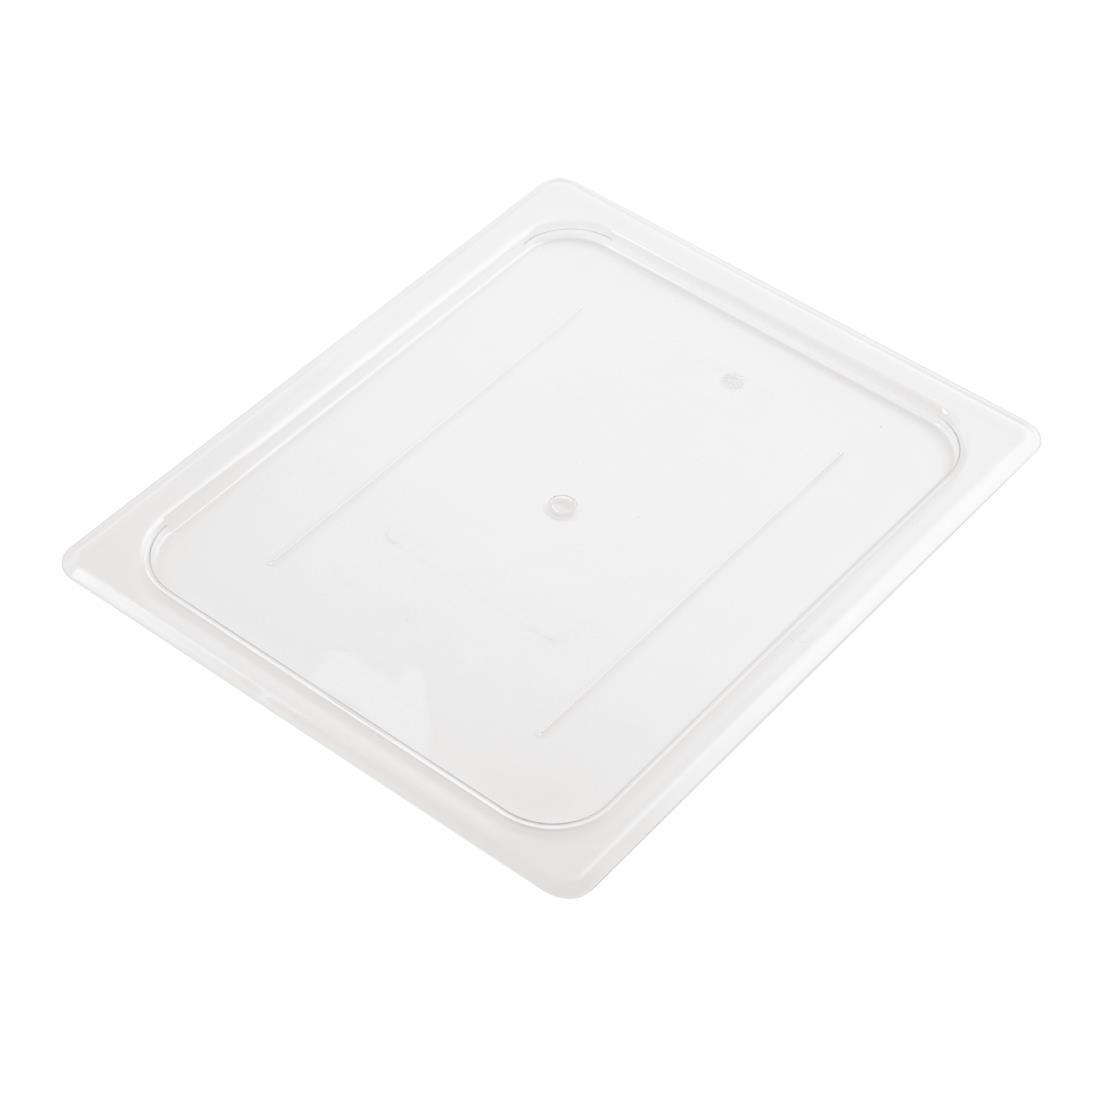 Cambro Clear Polycarbonate 1/2 Gastronorm Lid - DC663  - 2